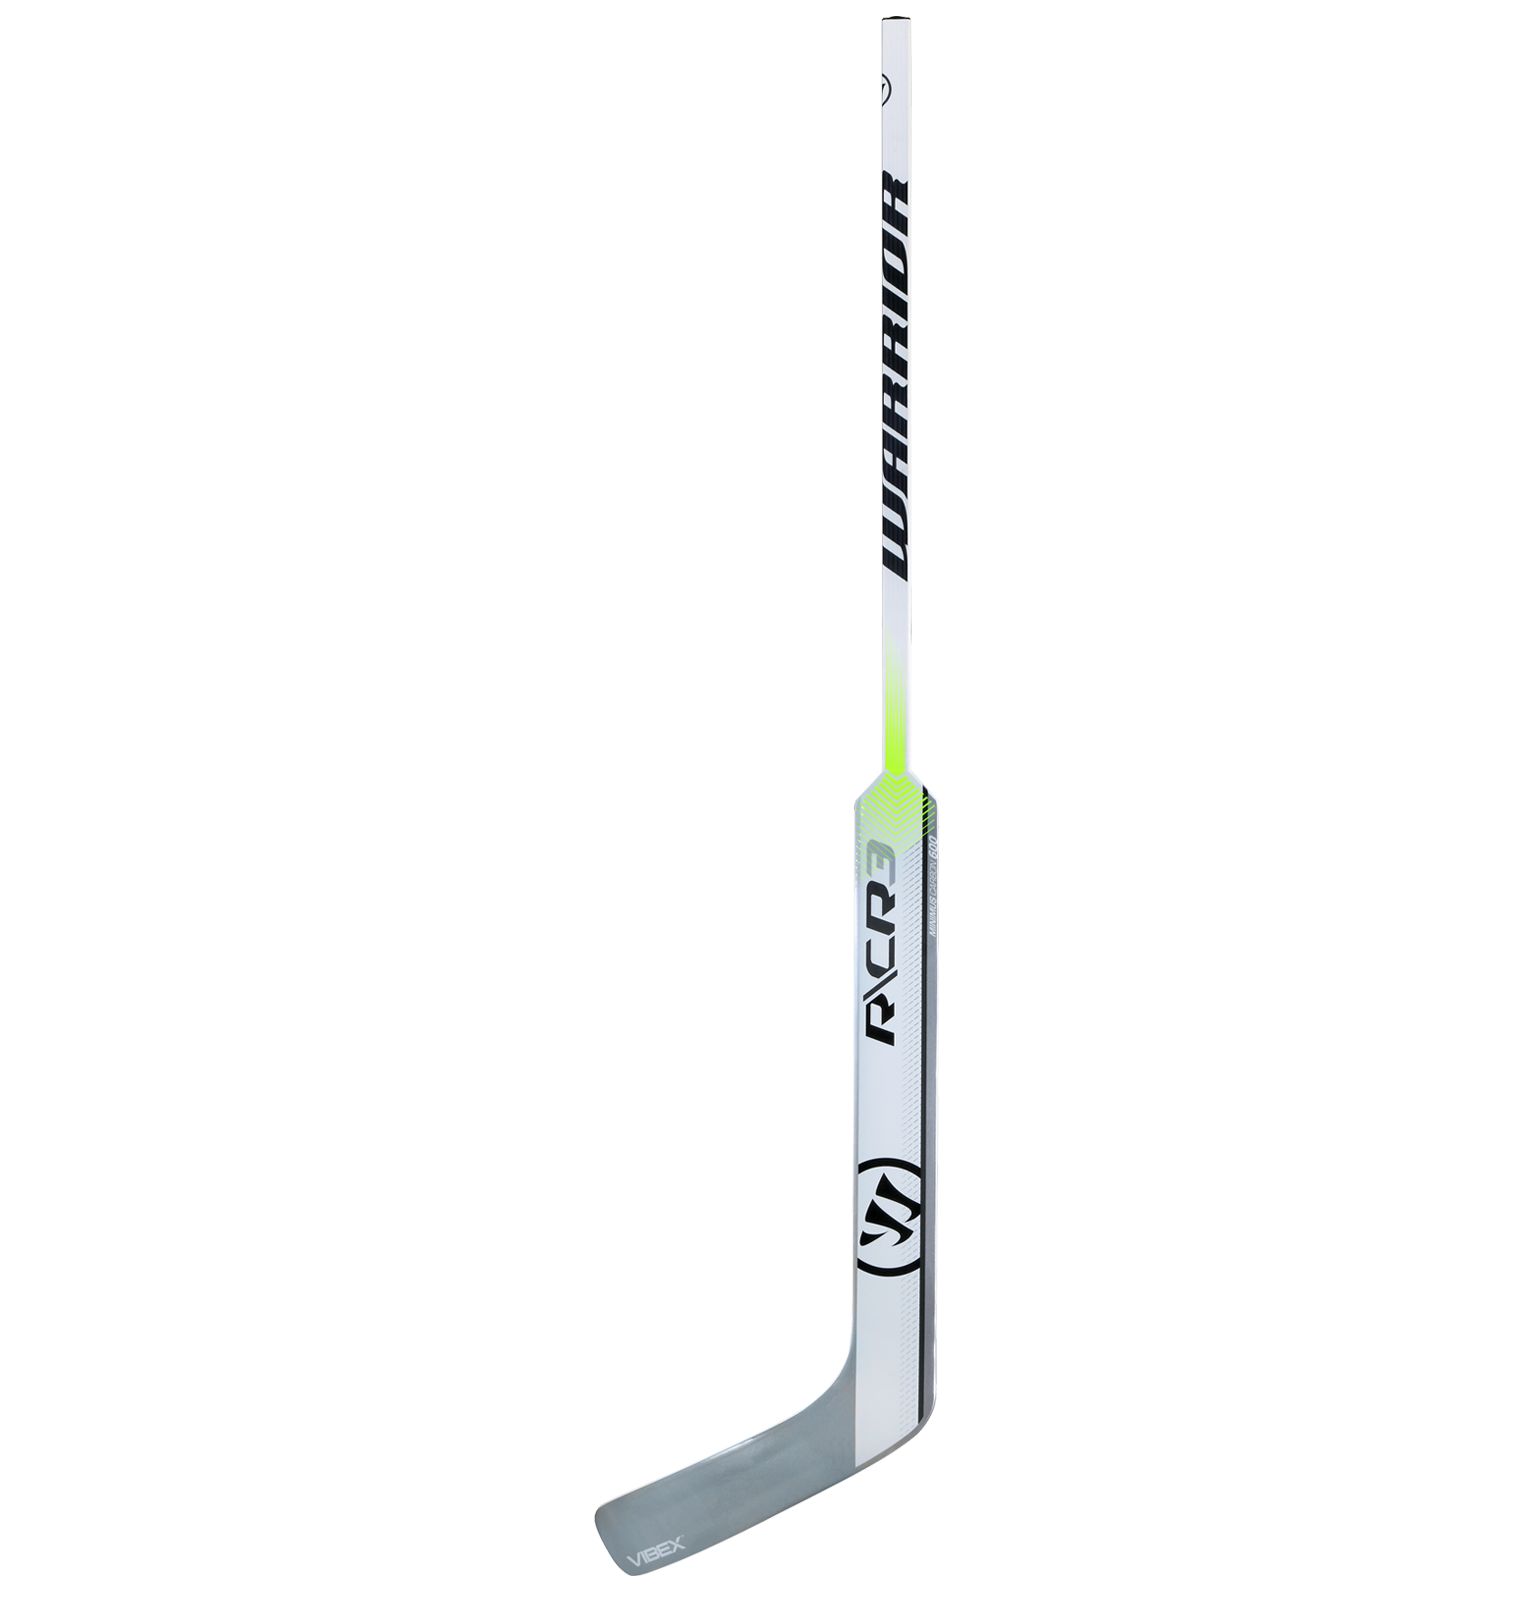 Ritual CR3 SR Goal Stick, White with Black & Silver image number 1